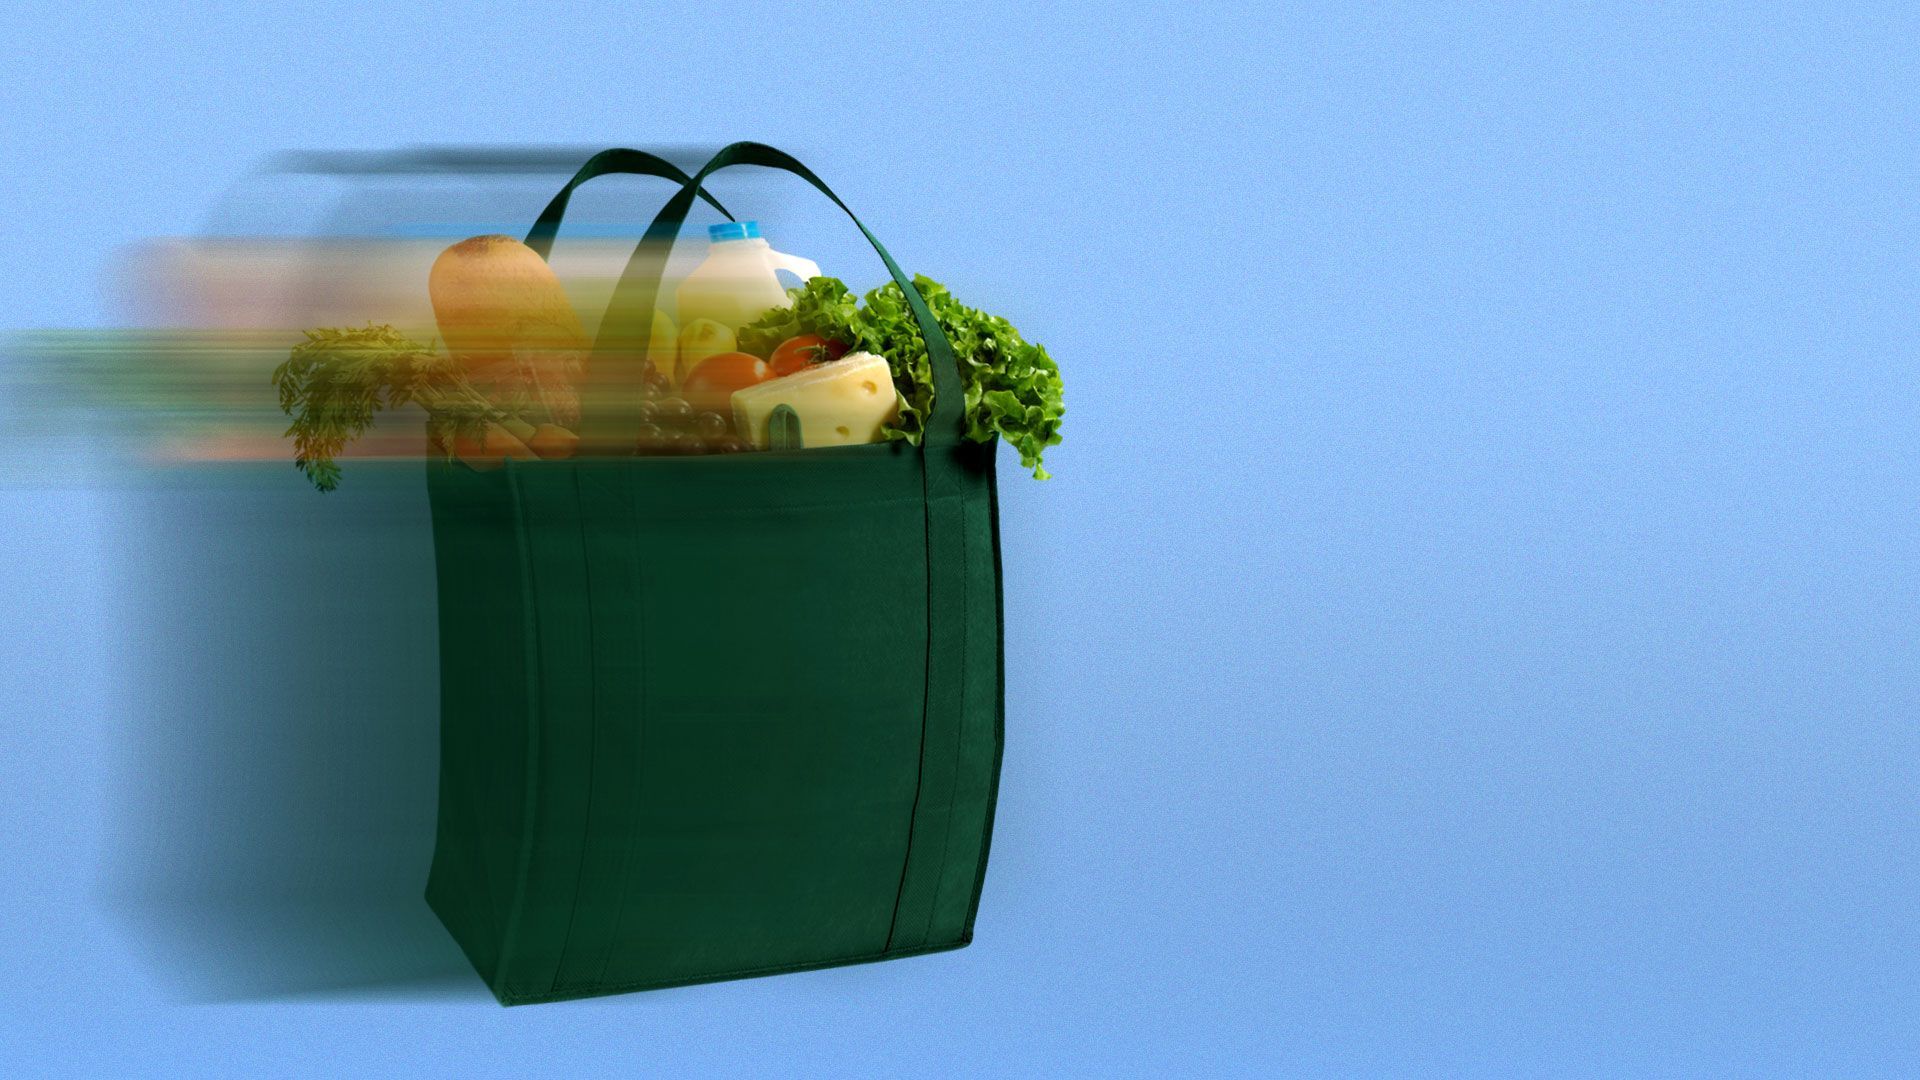 Illustration of a grocery bag speeding into the frame.